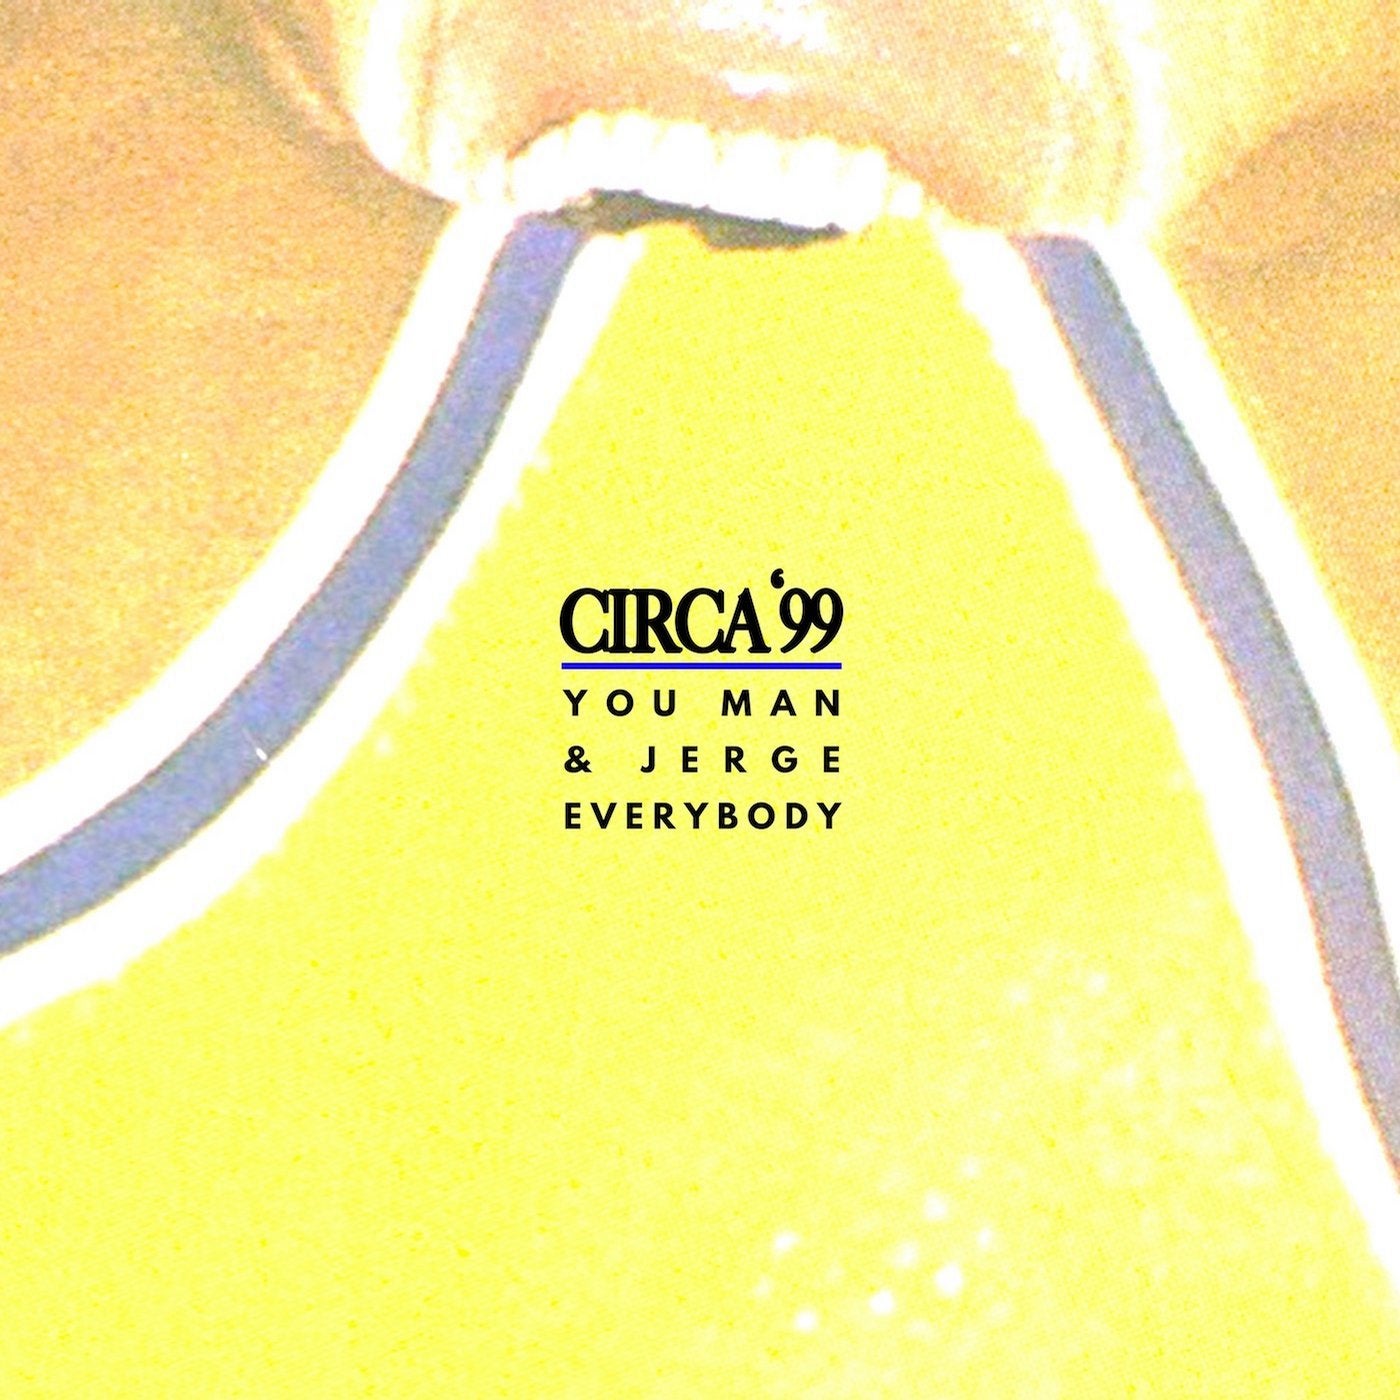 image cover: You Man, Jerge - Everybody on Circa ’99